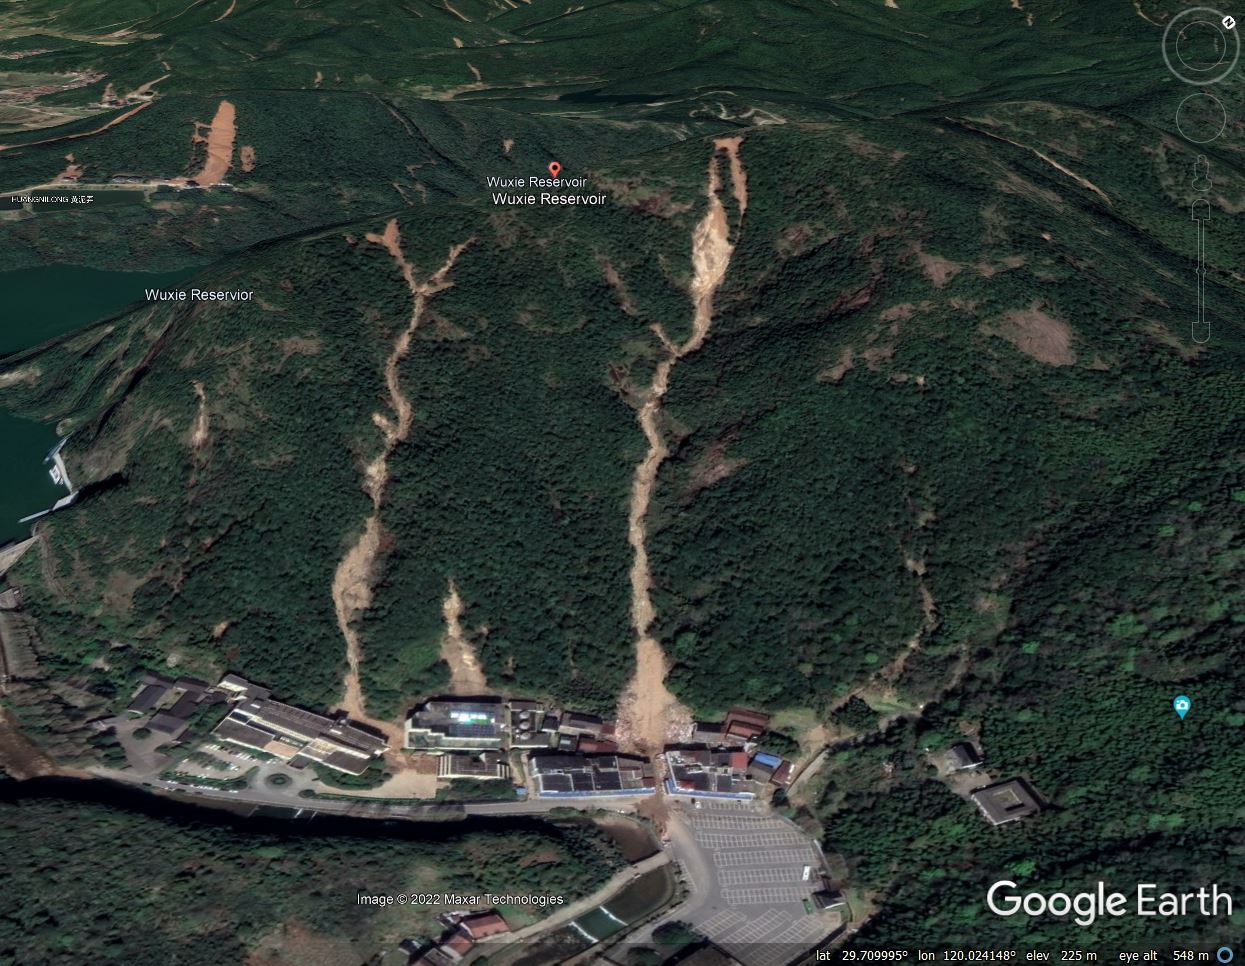 Damaging debris flows triggered by the 10 June 2021 rainfall event at Wuxie in China.